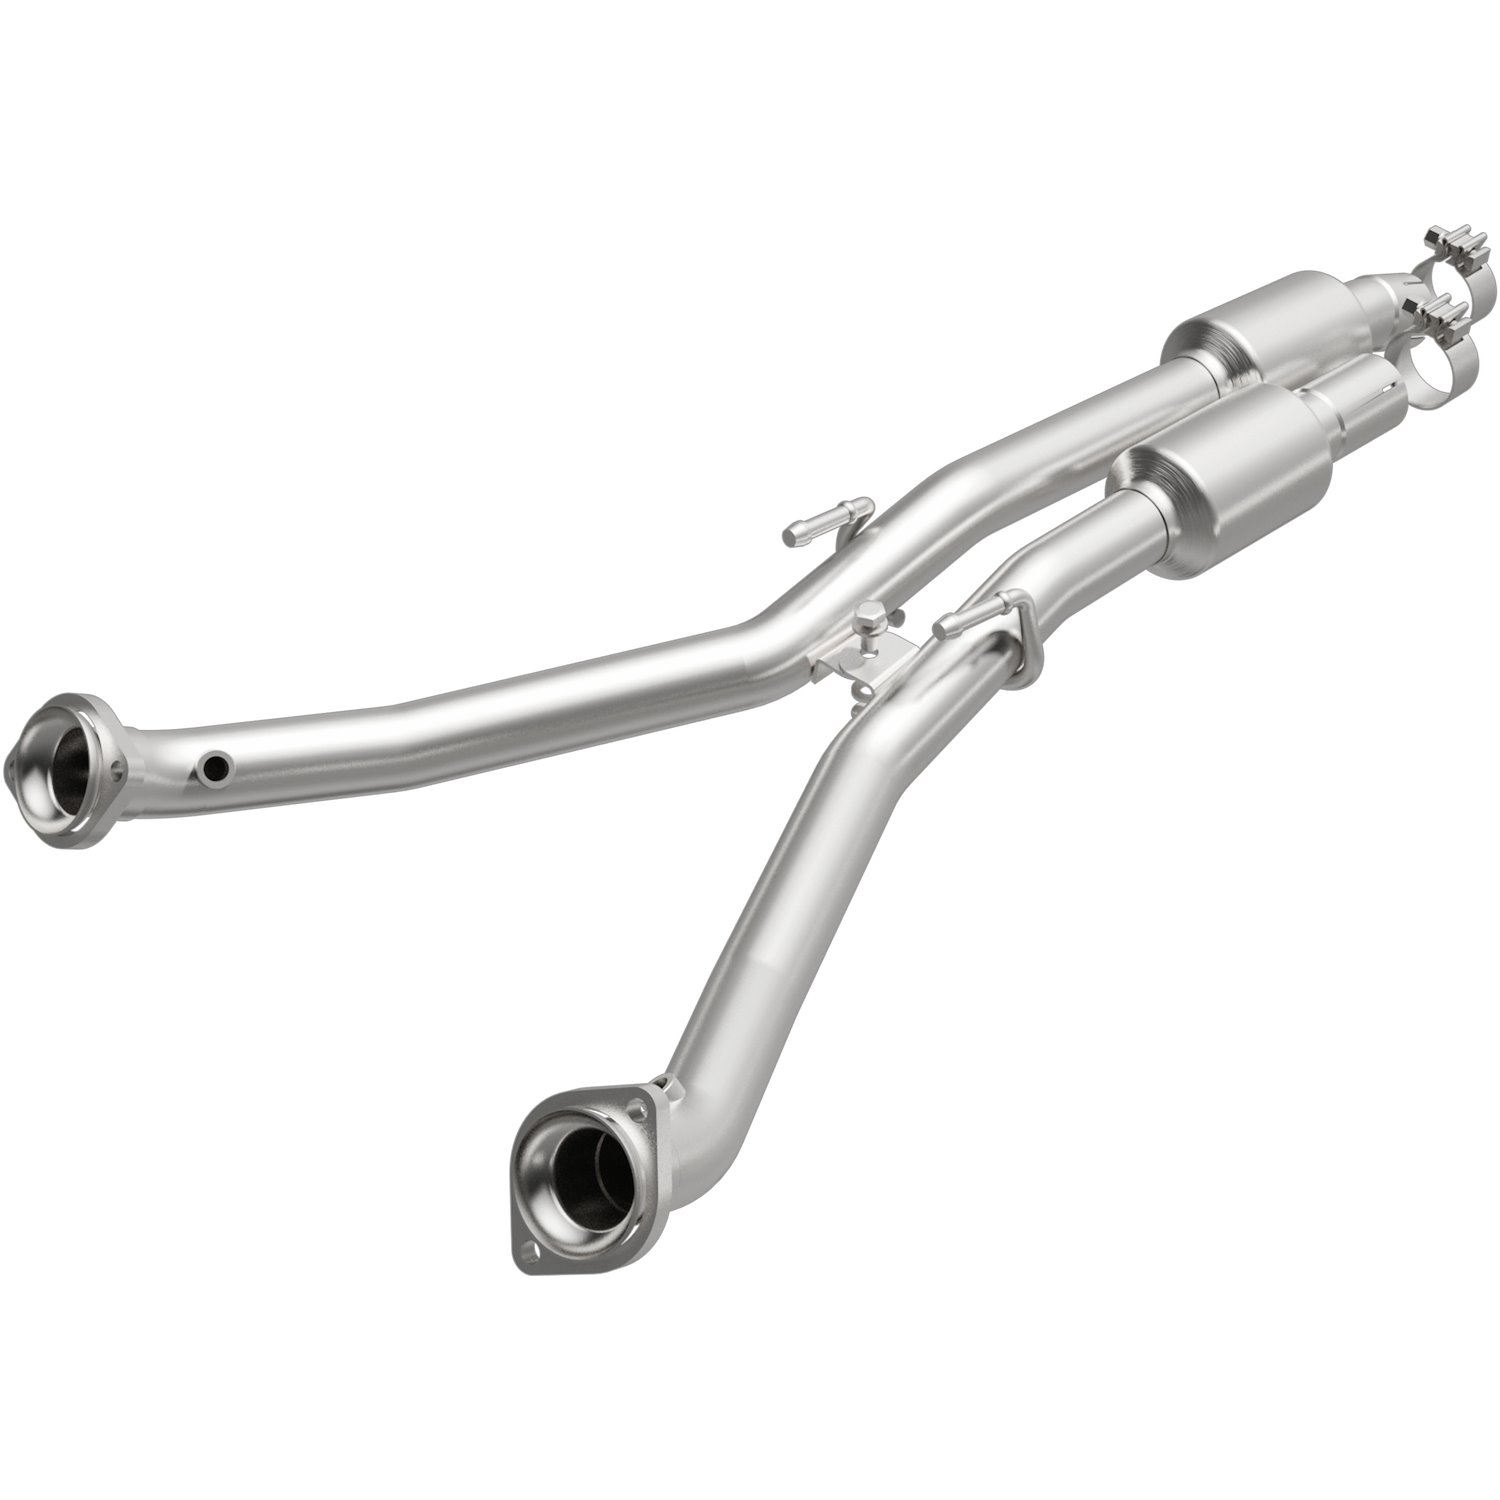 2012-2019 Cadillac CTS OEM Grade Federal / EPA Compliant Direct-Fit Catalytic Converter